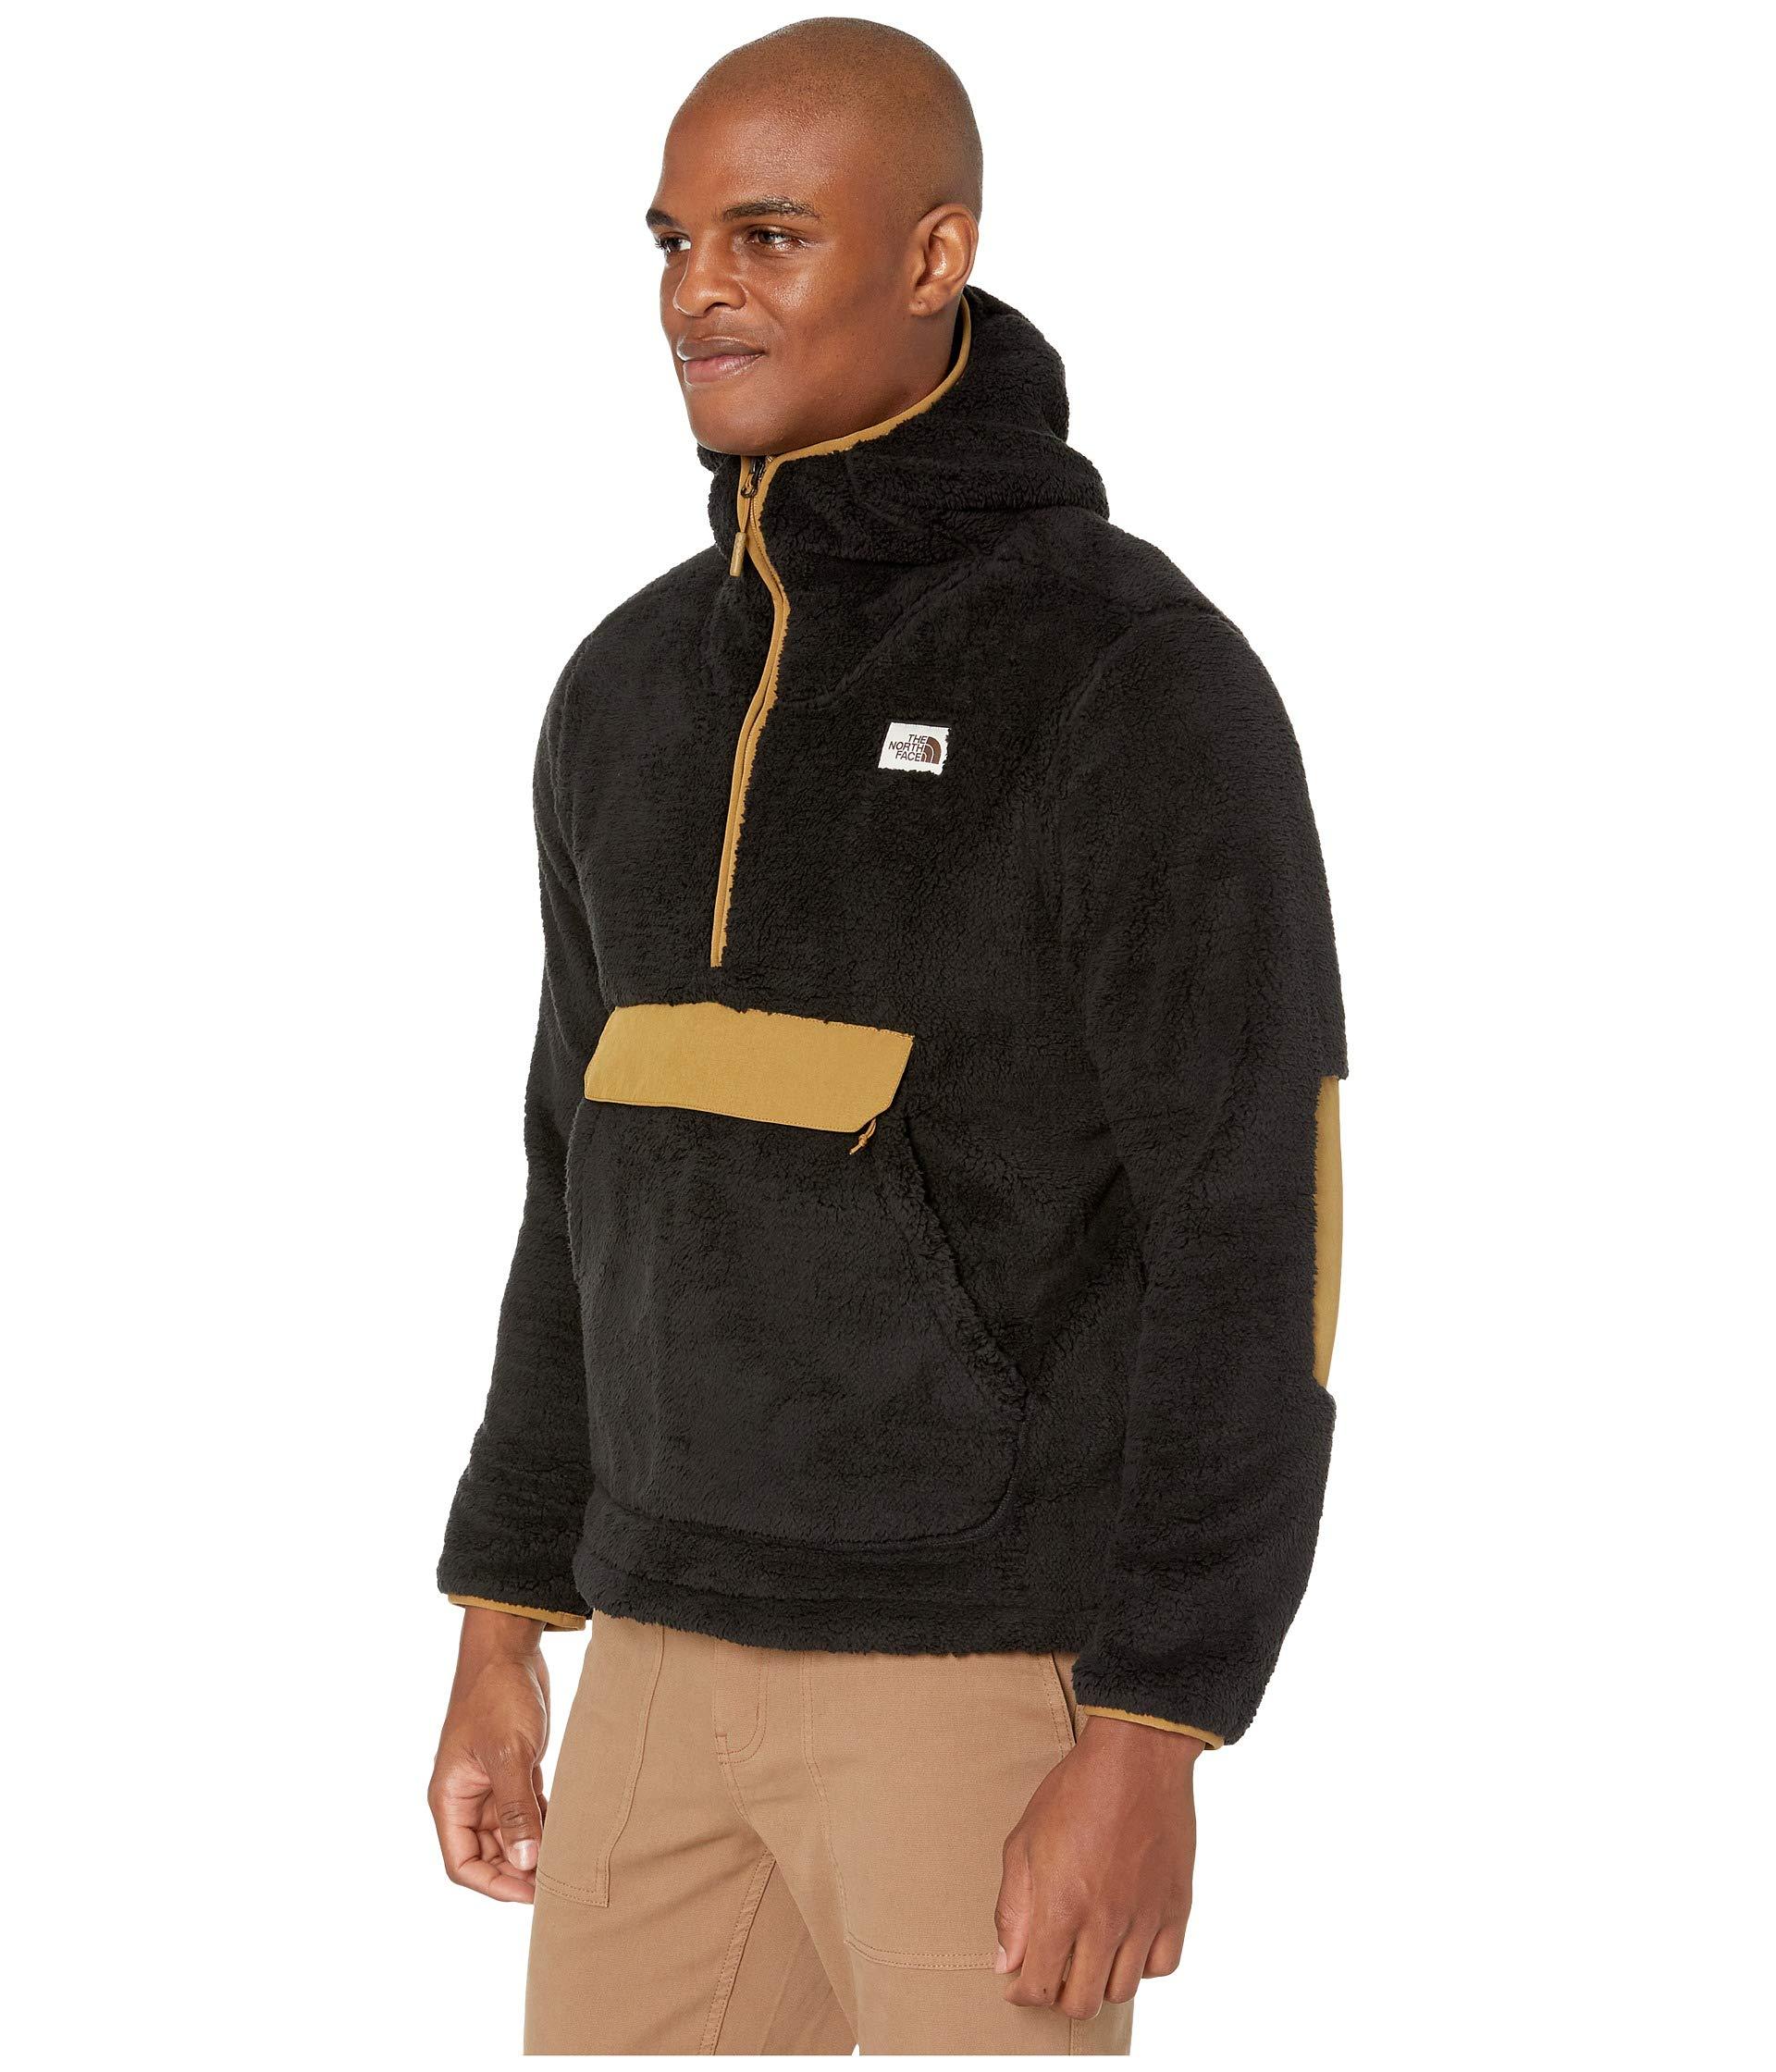 The North Face Fleece Campshire Pullover Hoodie in Black for Men - Lyst